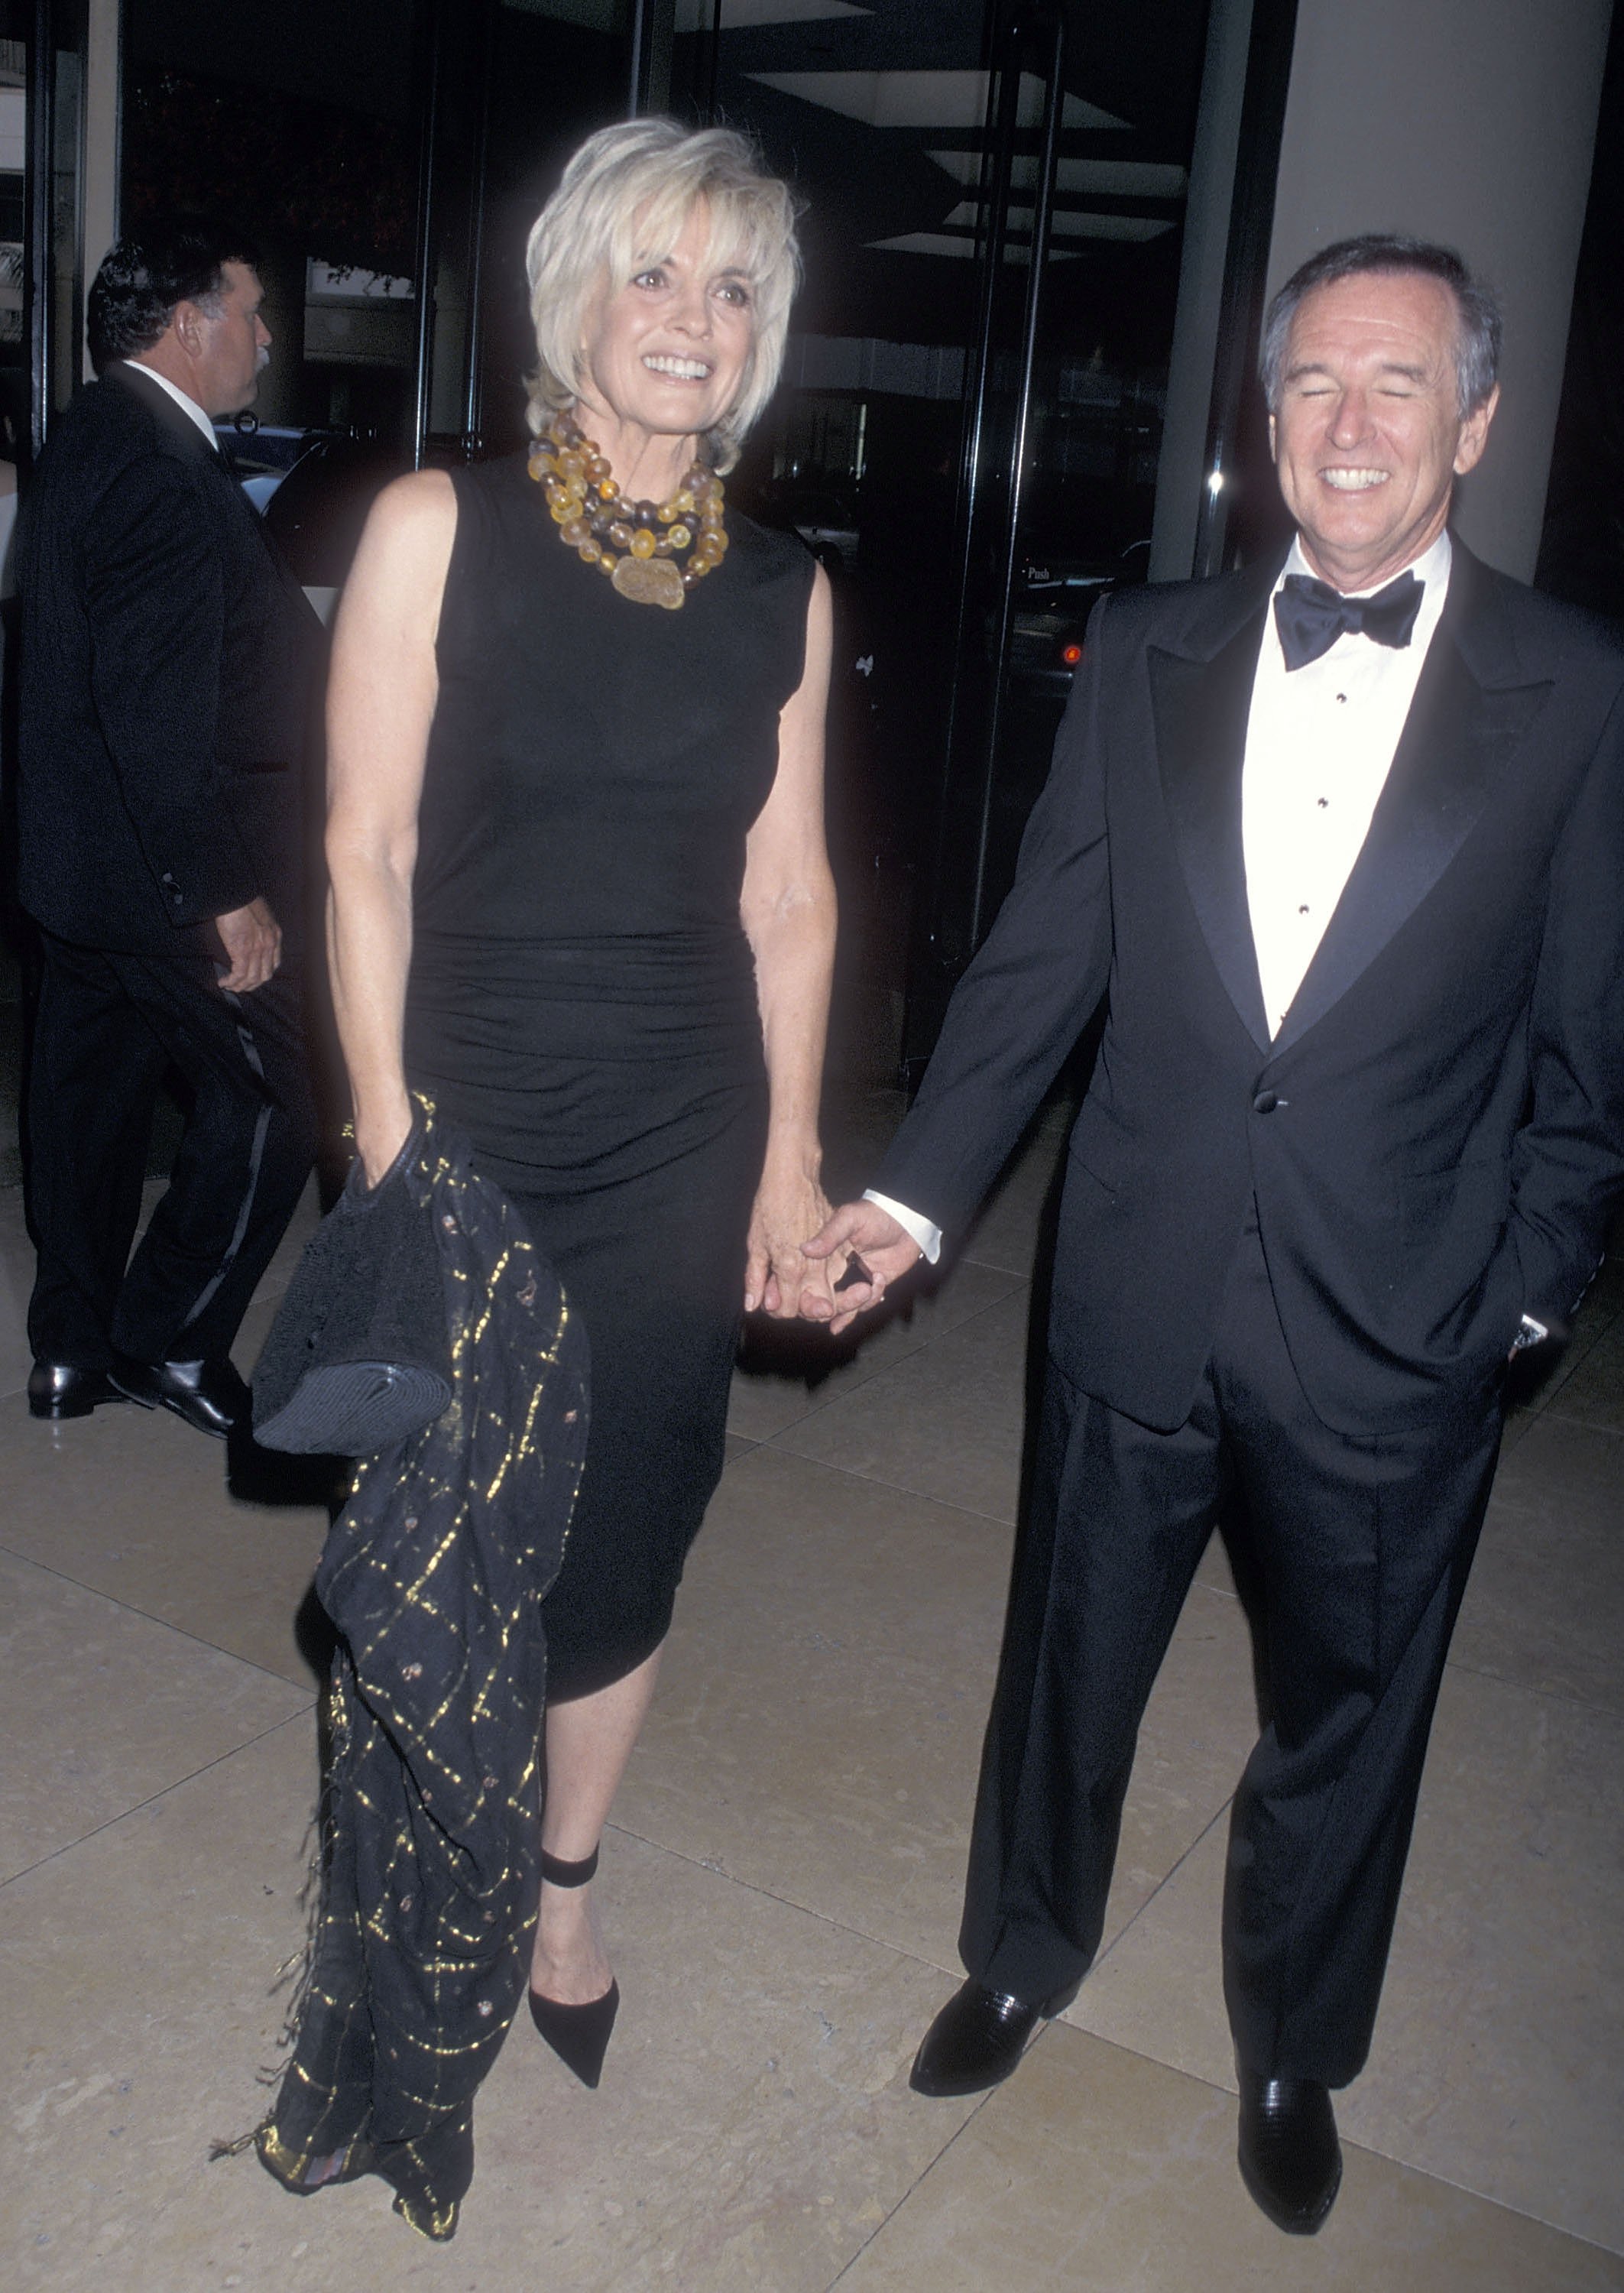 Actress Linda Gray and screenwriter Dan Gordon attend the Fifth Annual Hollywood Film Festival - Awards Ceremony on August 6, 2001 at the Beverly Hilton Hotel in Beverly Hills, California. | Source: Getty Images